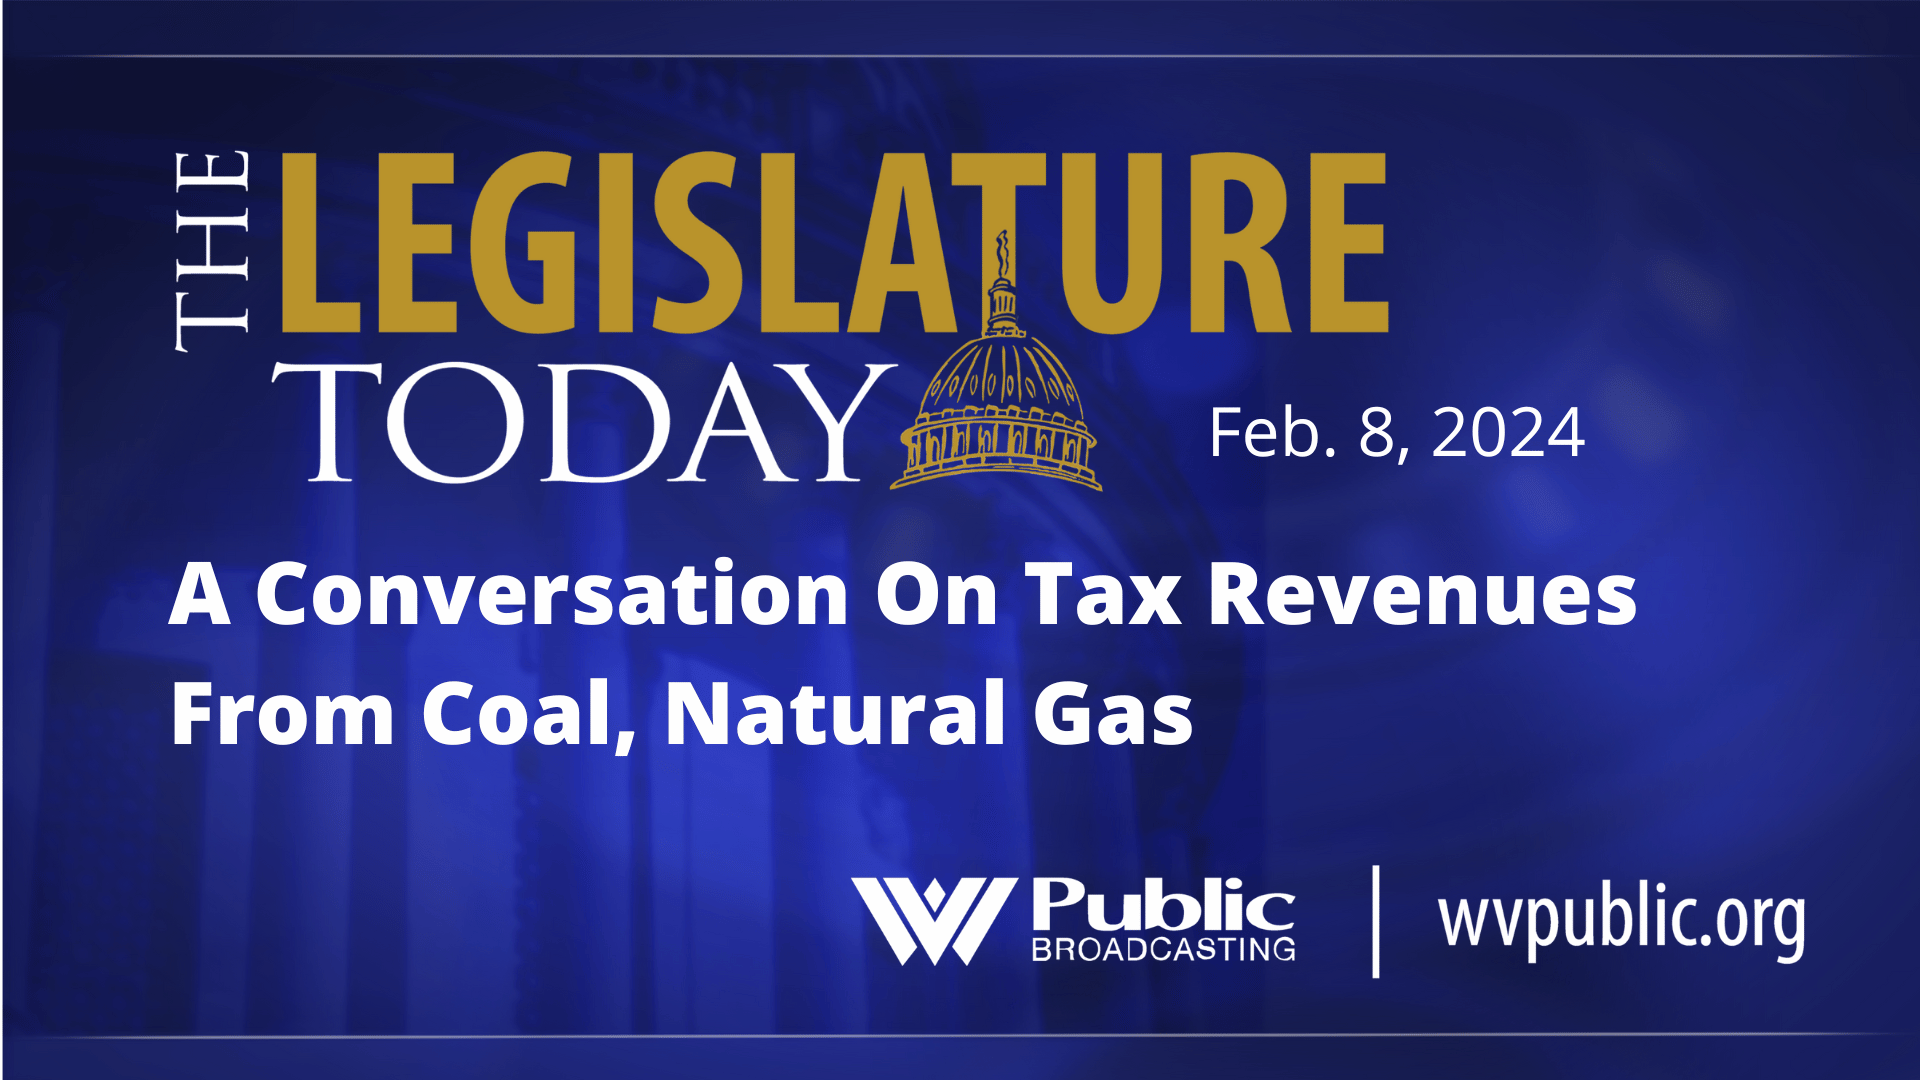 A Conversation On Tax Revenues From Coal, Natural Gas